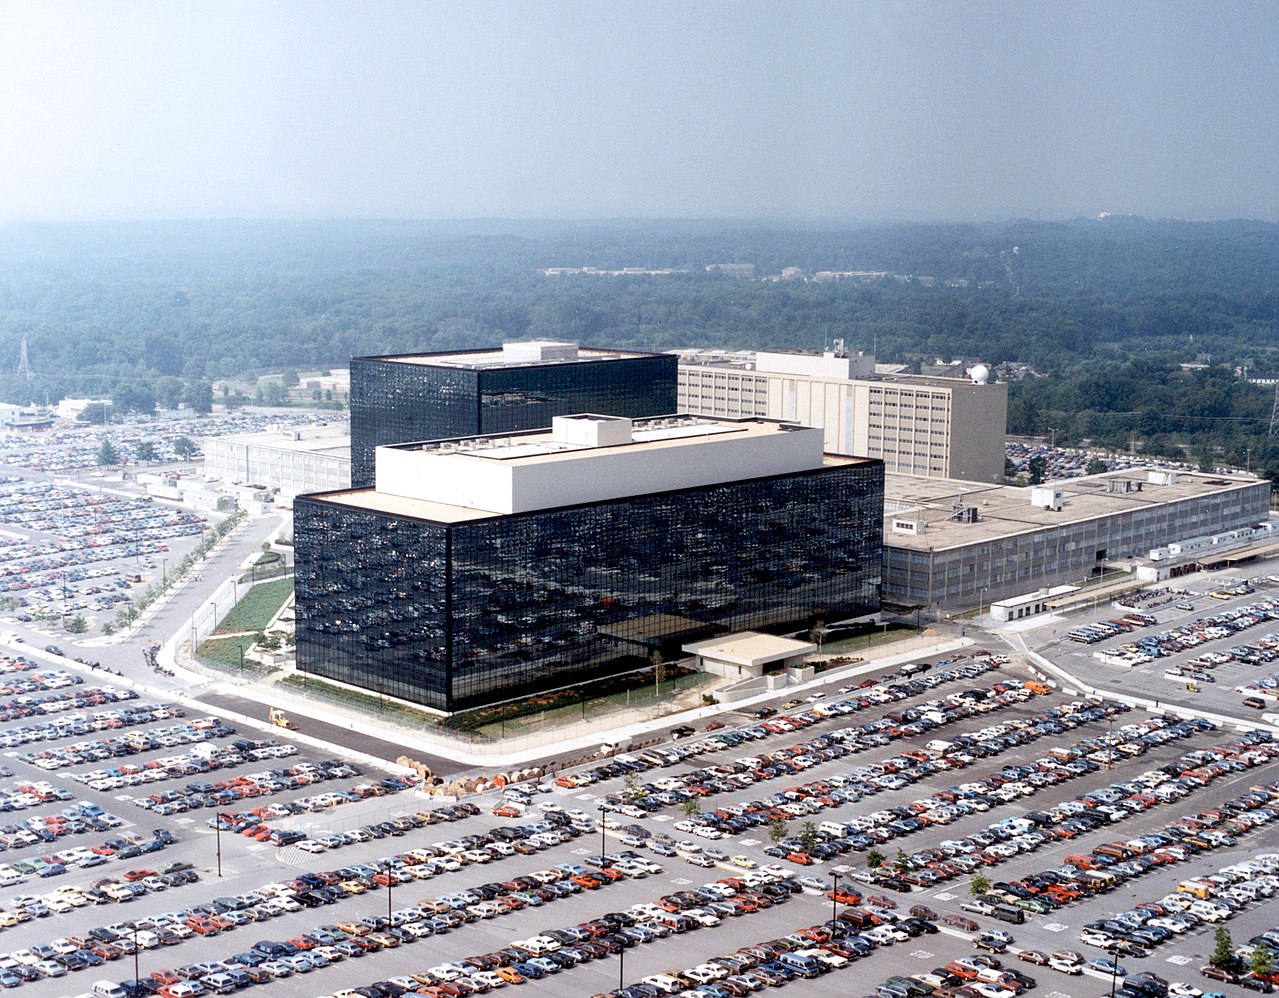 The National Security Agency's headquarters, Fort Meade, Maryland. Image courtesy of the NSA, via Wikimedia Commons